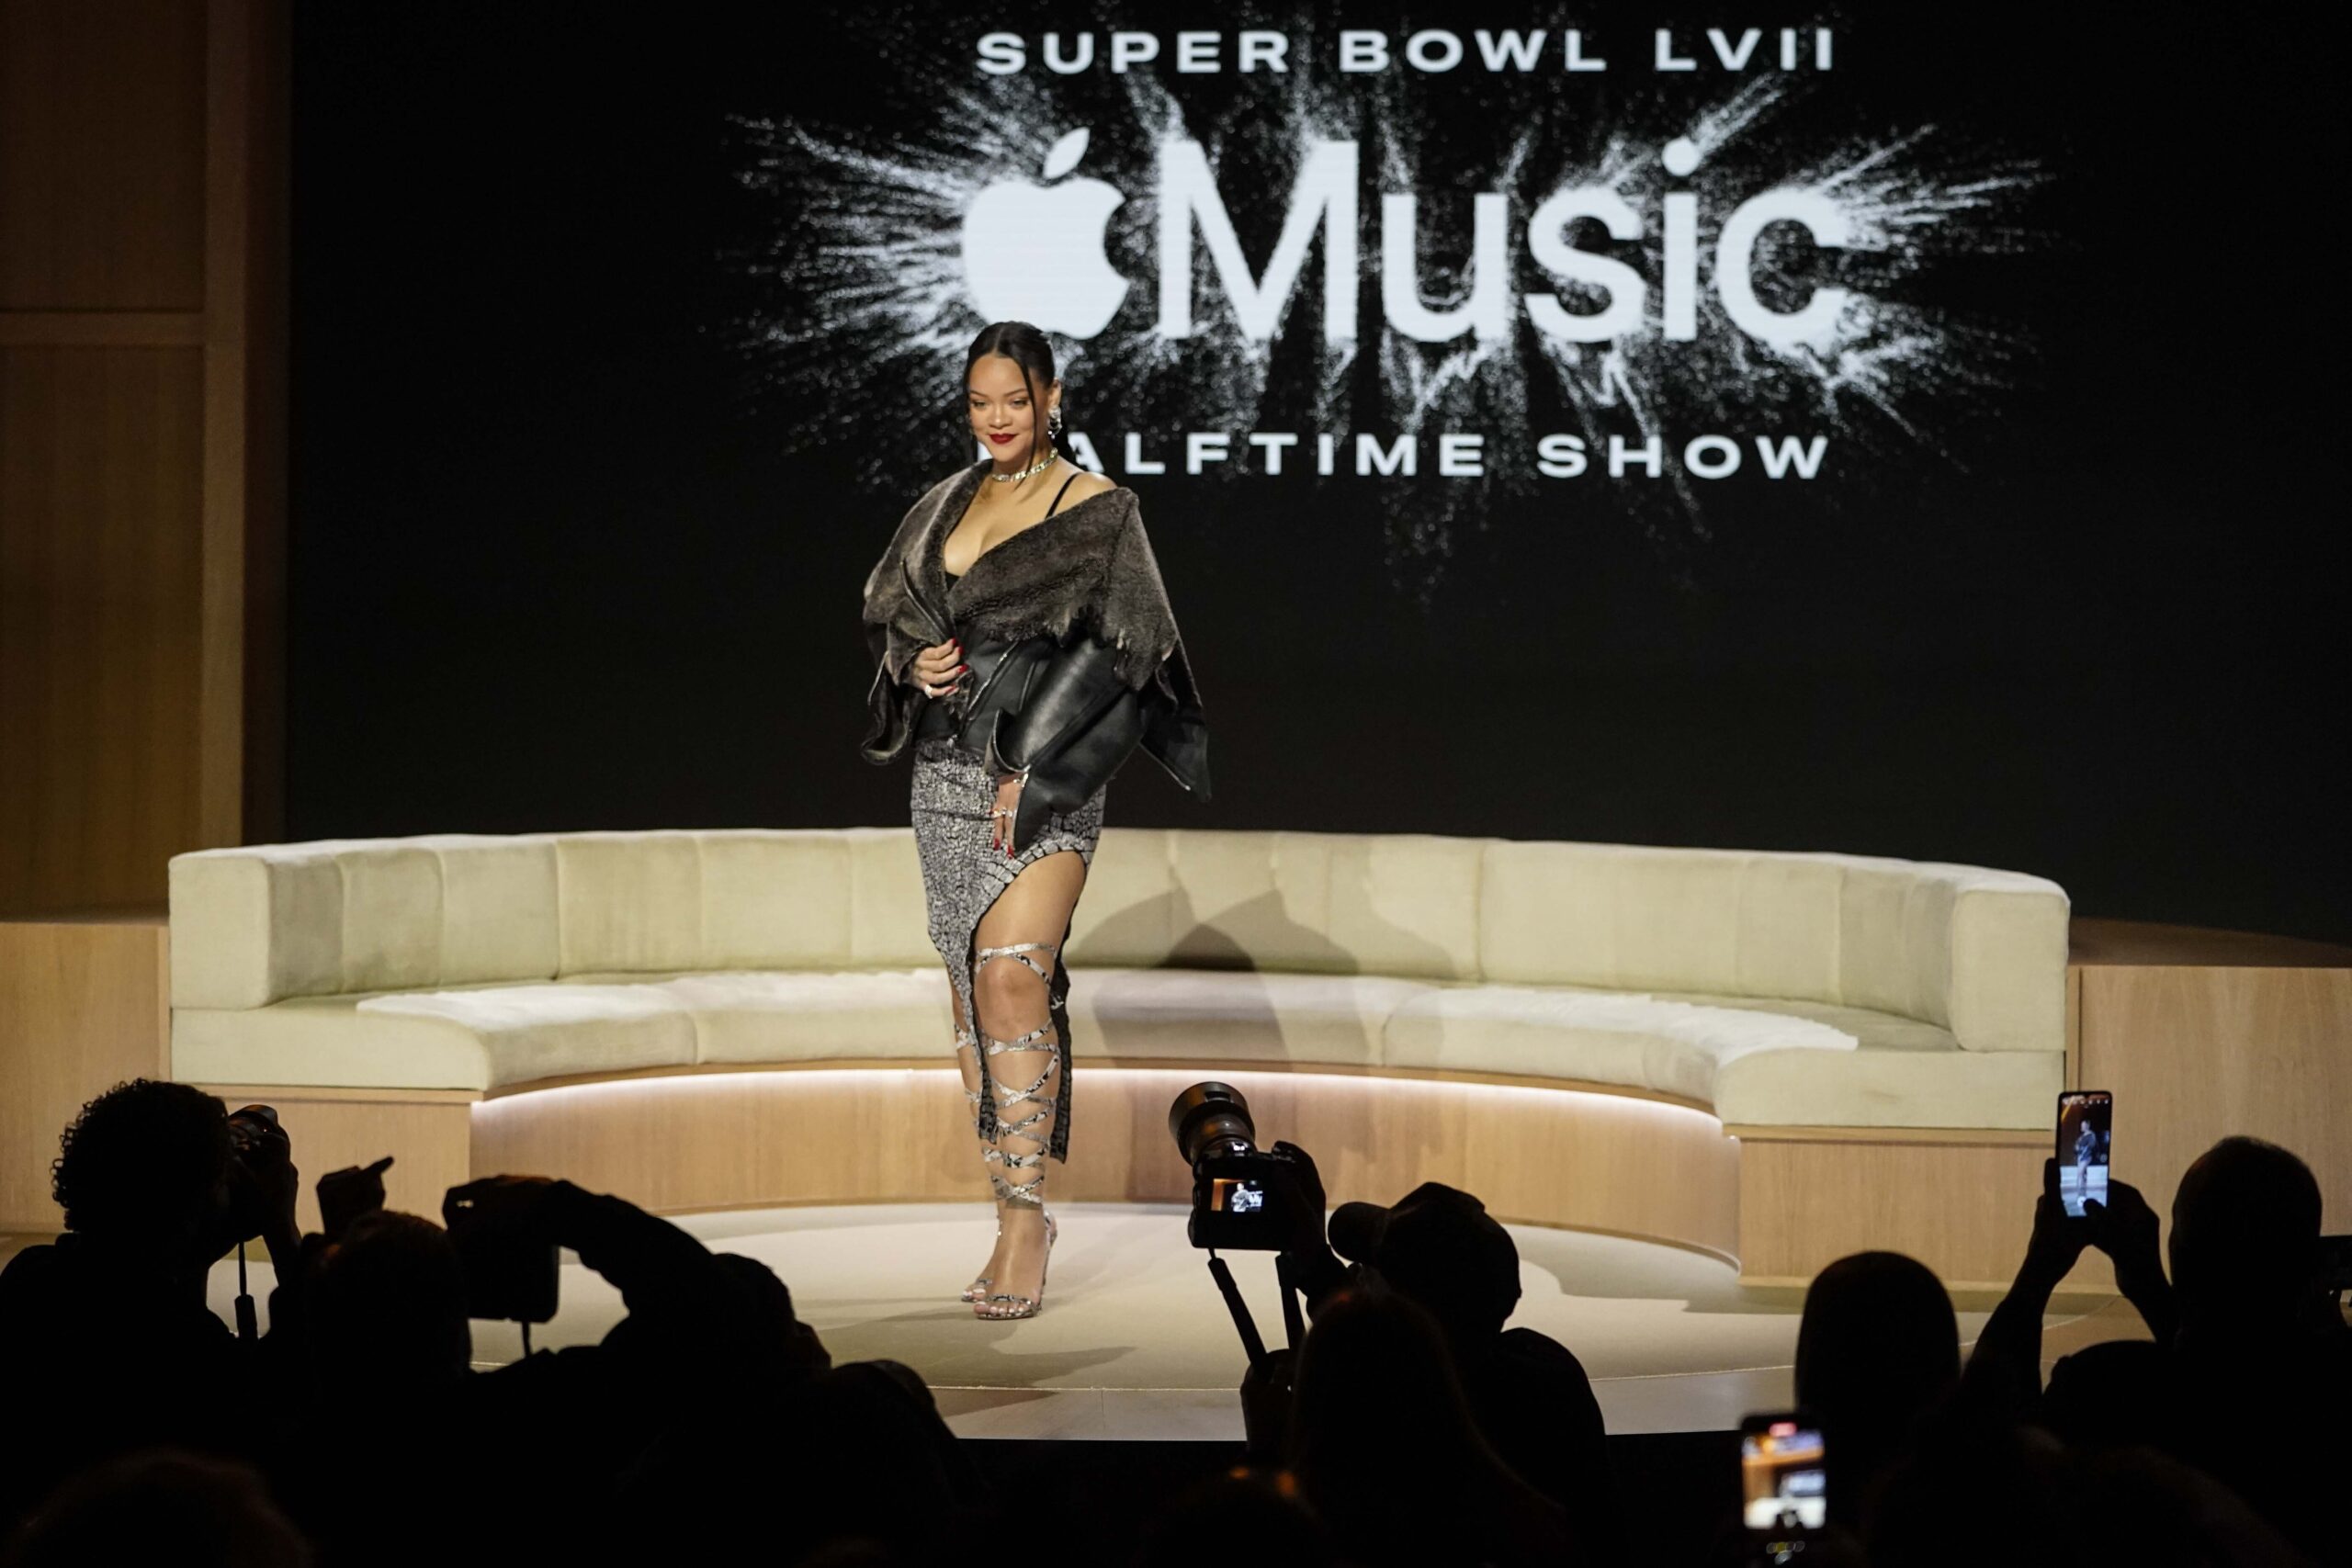 Rihanna poses for a photo after a halftime show news conference ahead of the Super Bowl 57 NFL football game, Thursday, Feb. 9, 2023, in Phoenix. Photo credit: Mike Stewart, The Associated Press